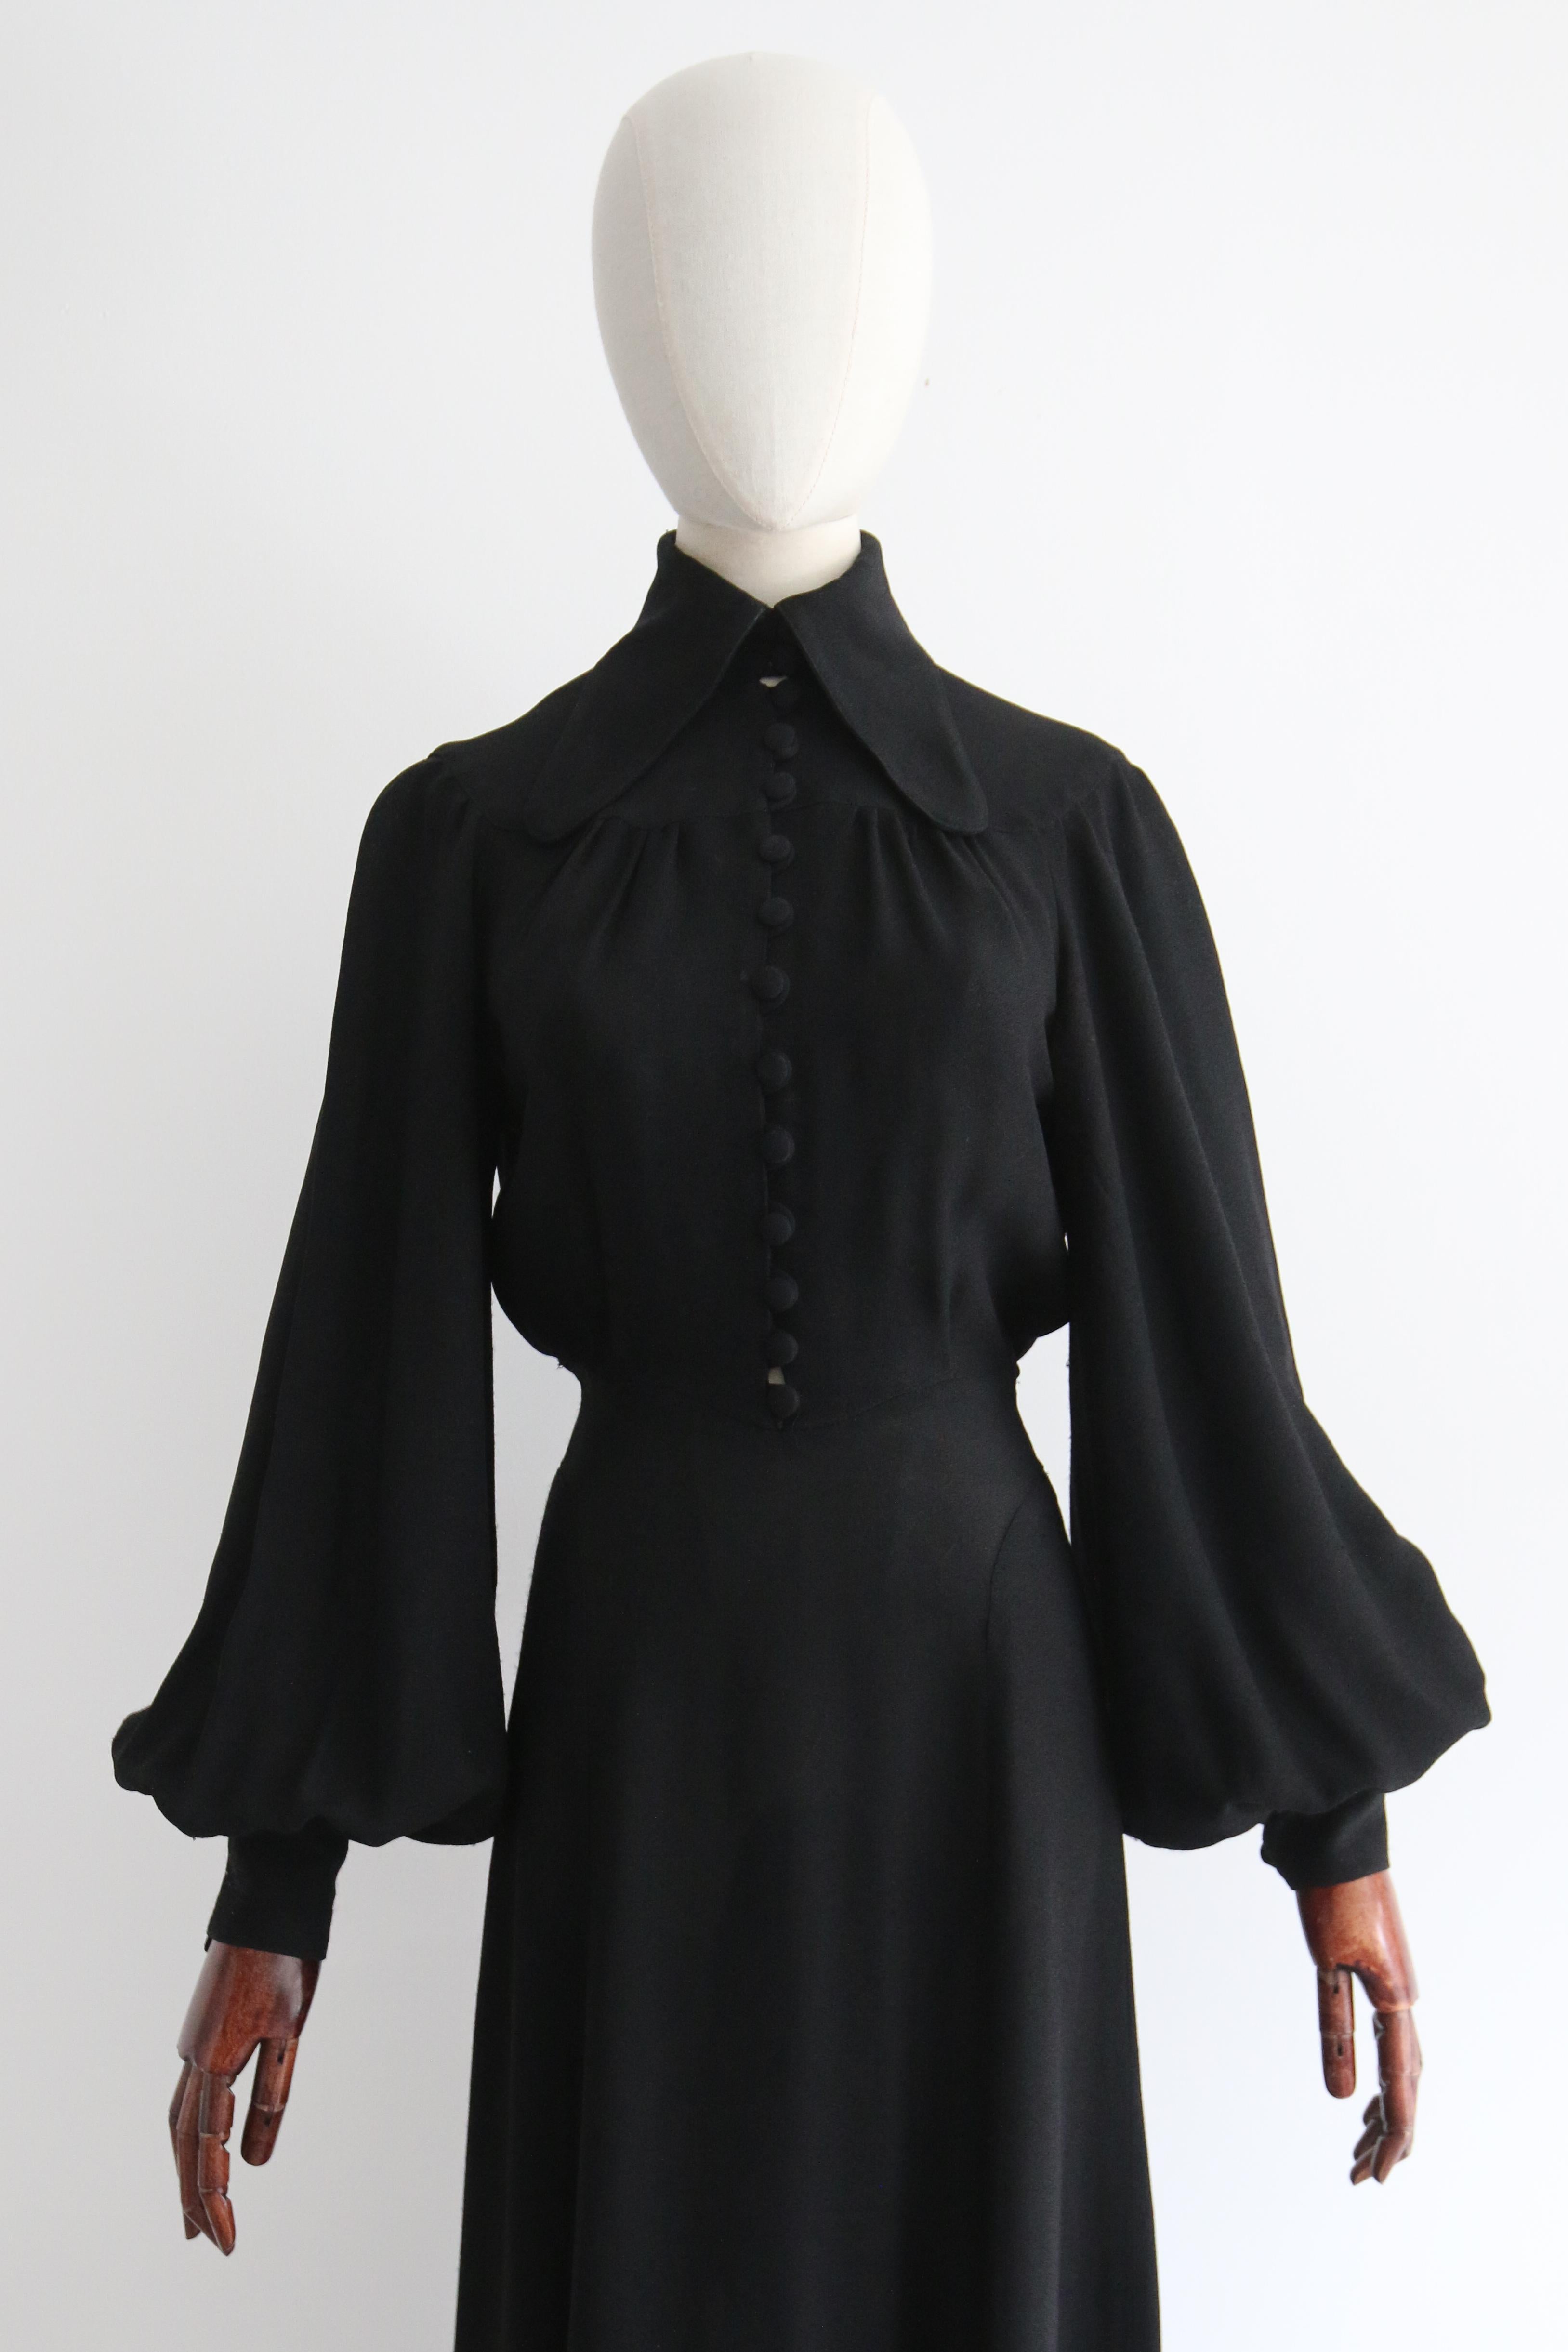 This truly iconic 1970's Ossie Clark moss crepe dress in the darkest shade of black moss crepe, is the perfect piece to add to your collectable and classic vintage wardrobe.  

The rounded neckline of the dress is framed by a wide dog ear collar